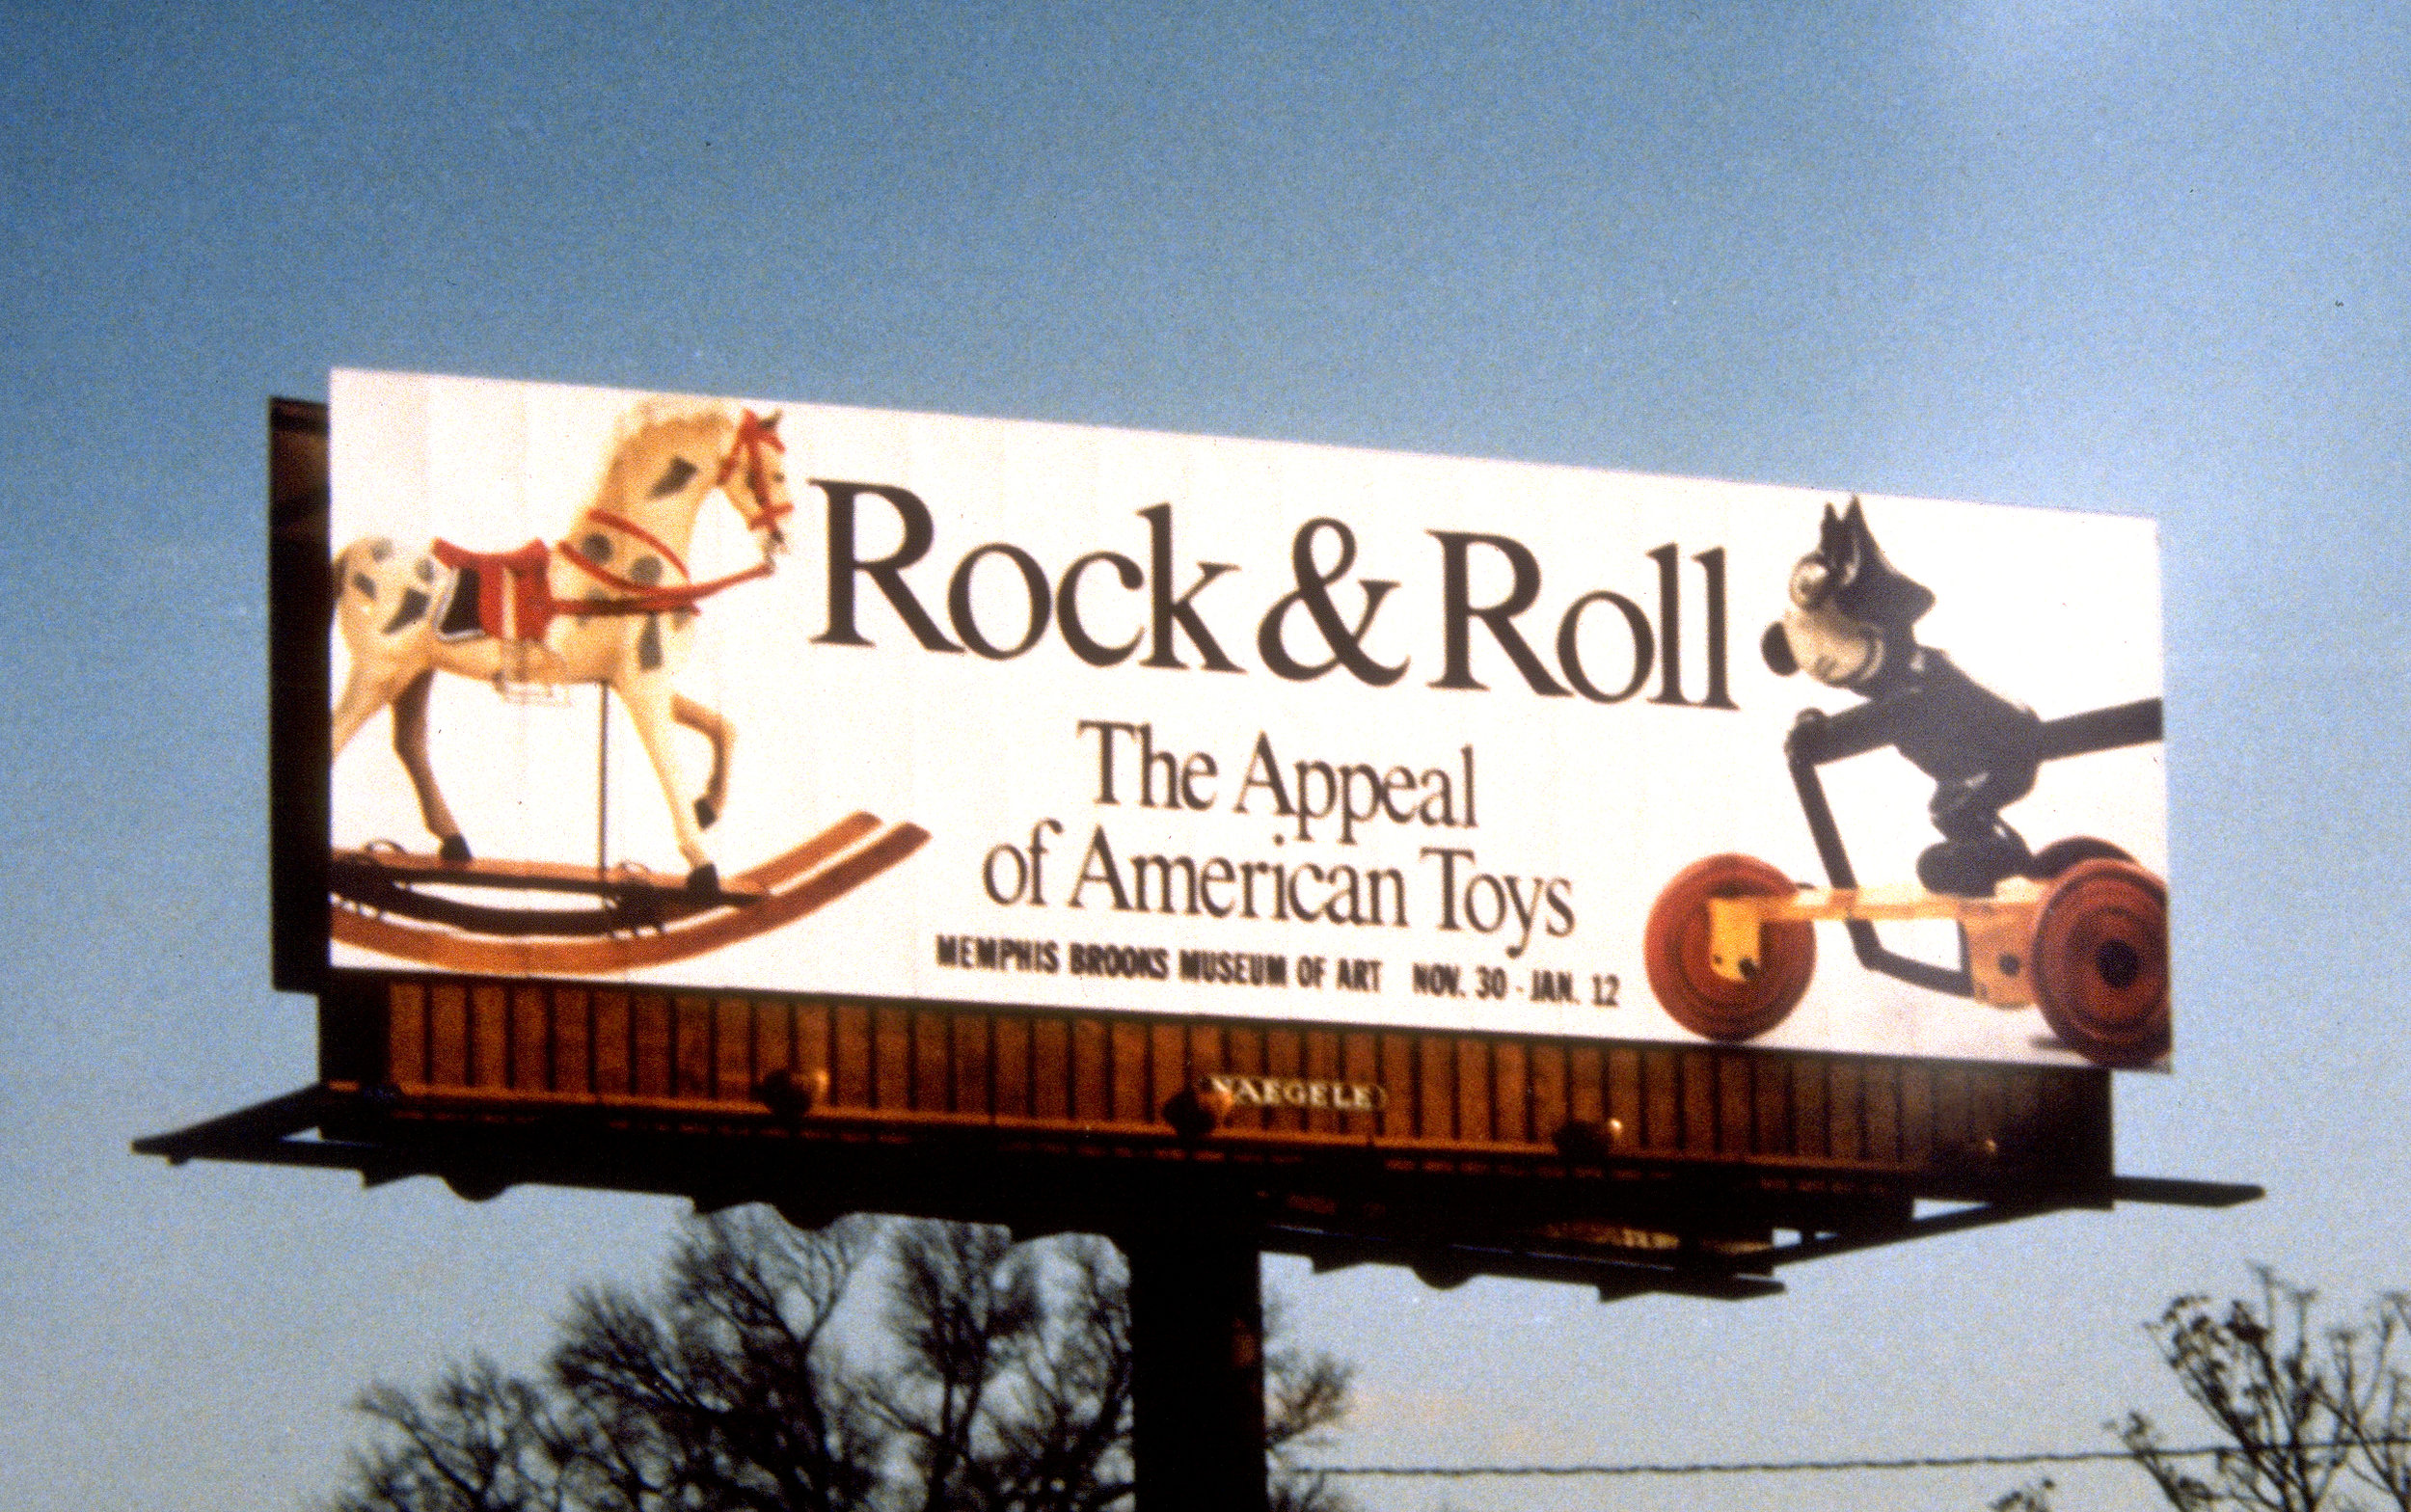  Memphis Brooks Museum of Art Appeal of American Toys Exhibition “Rock &amp; Roll” outdoor  Branding creative, copywriting and design by Chuck Mitchell 